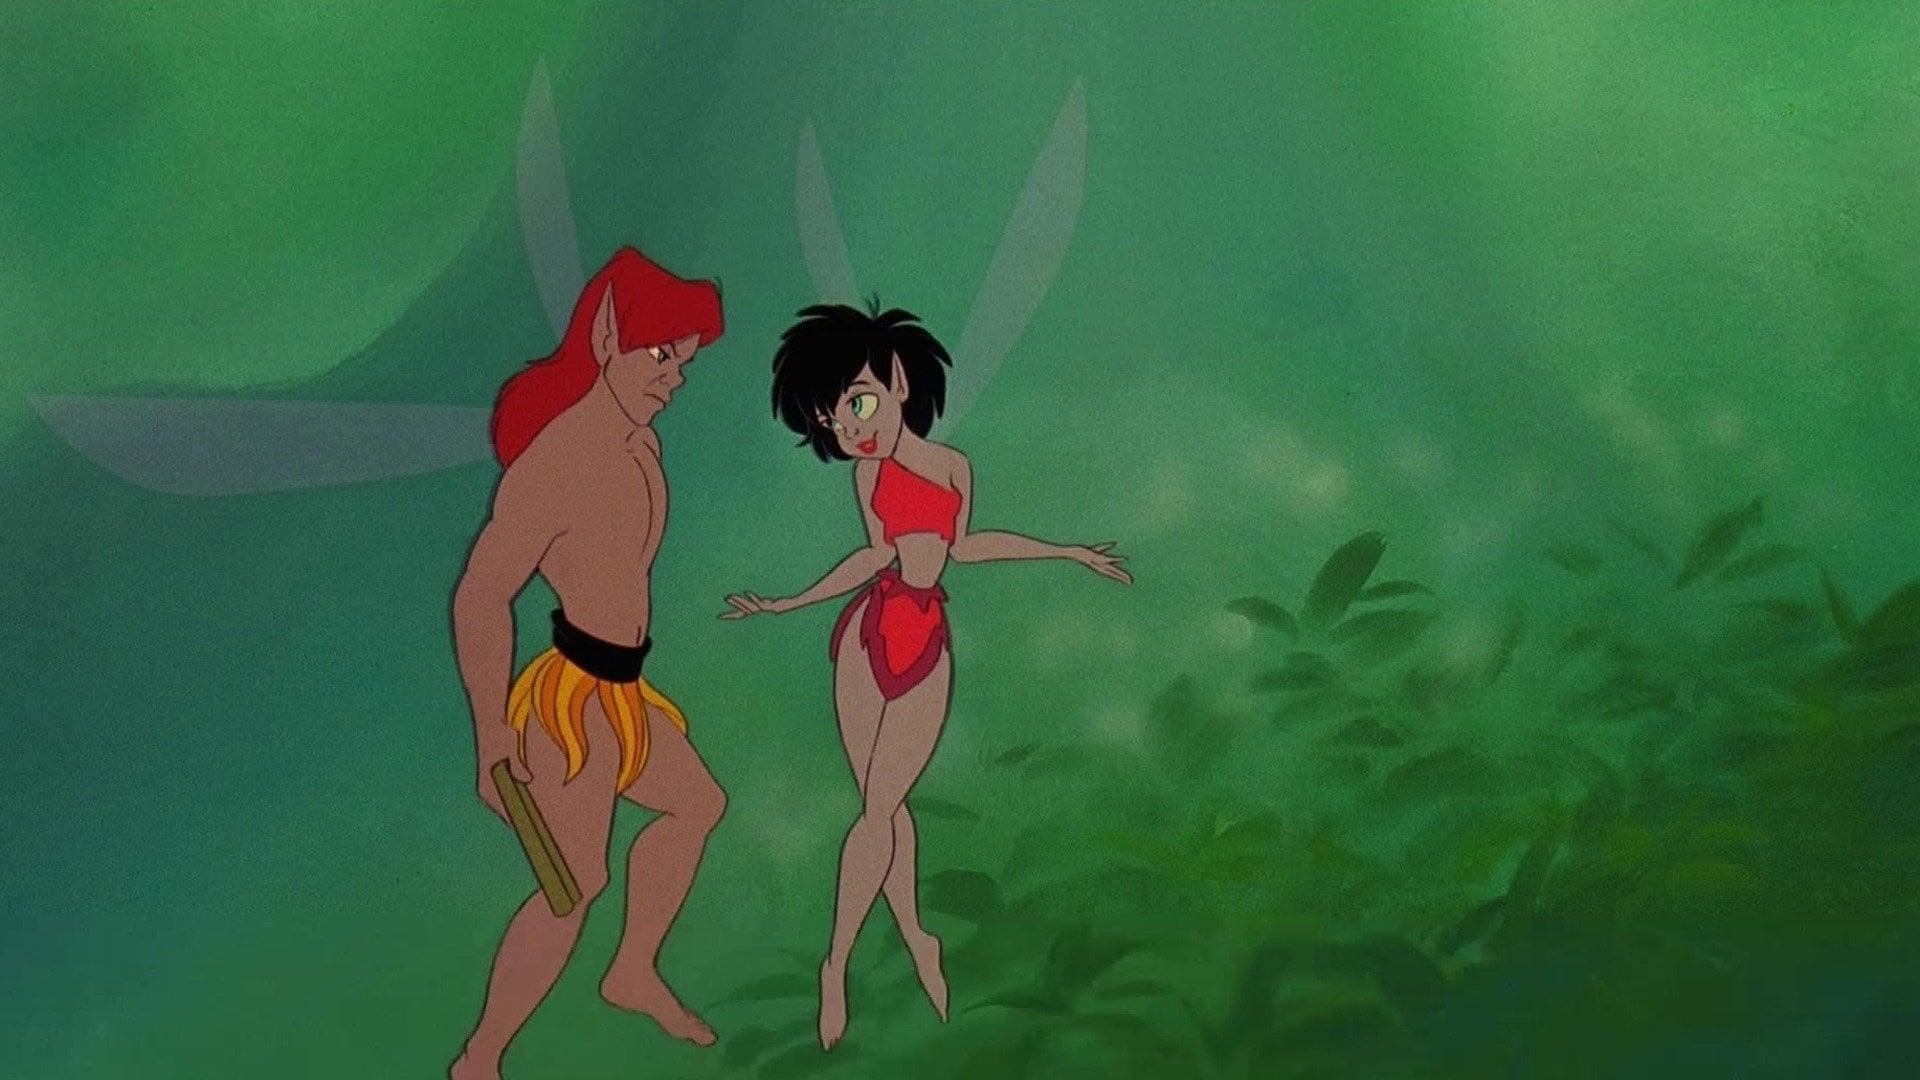 FernGully 2: The Magical Rescue backdrop